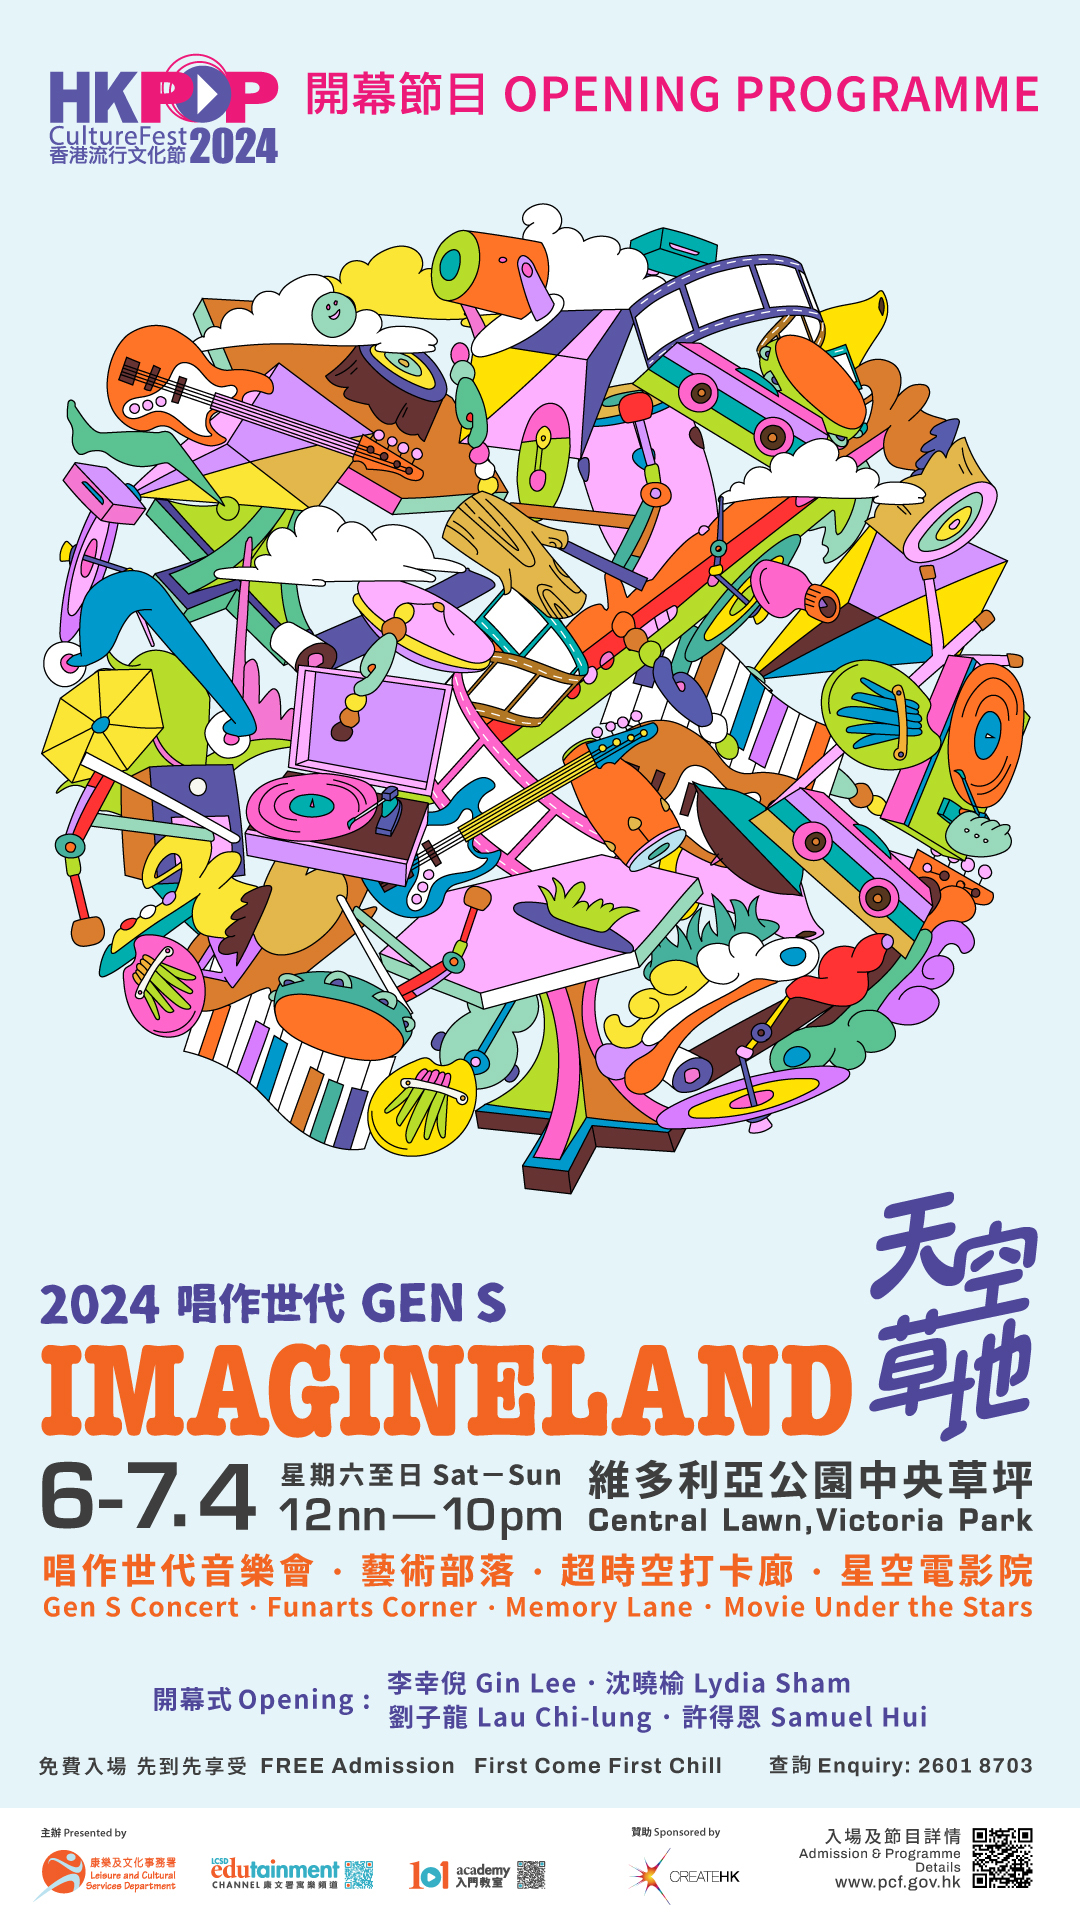 Hong Kong Pop Culture Festival 2024 -  Opening programme: ImagineLand on 6 to 7 April opens for FREE admission; other programmes last until February 2025